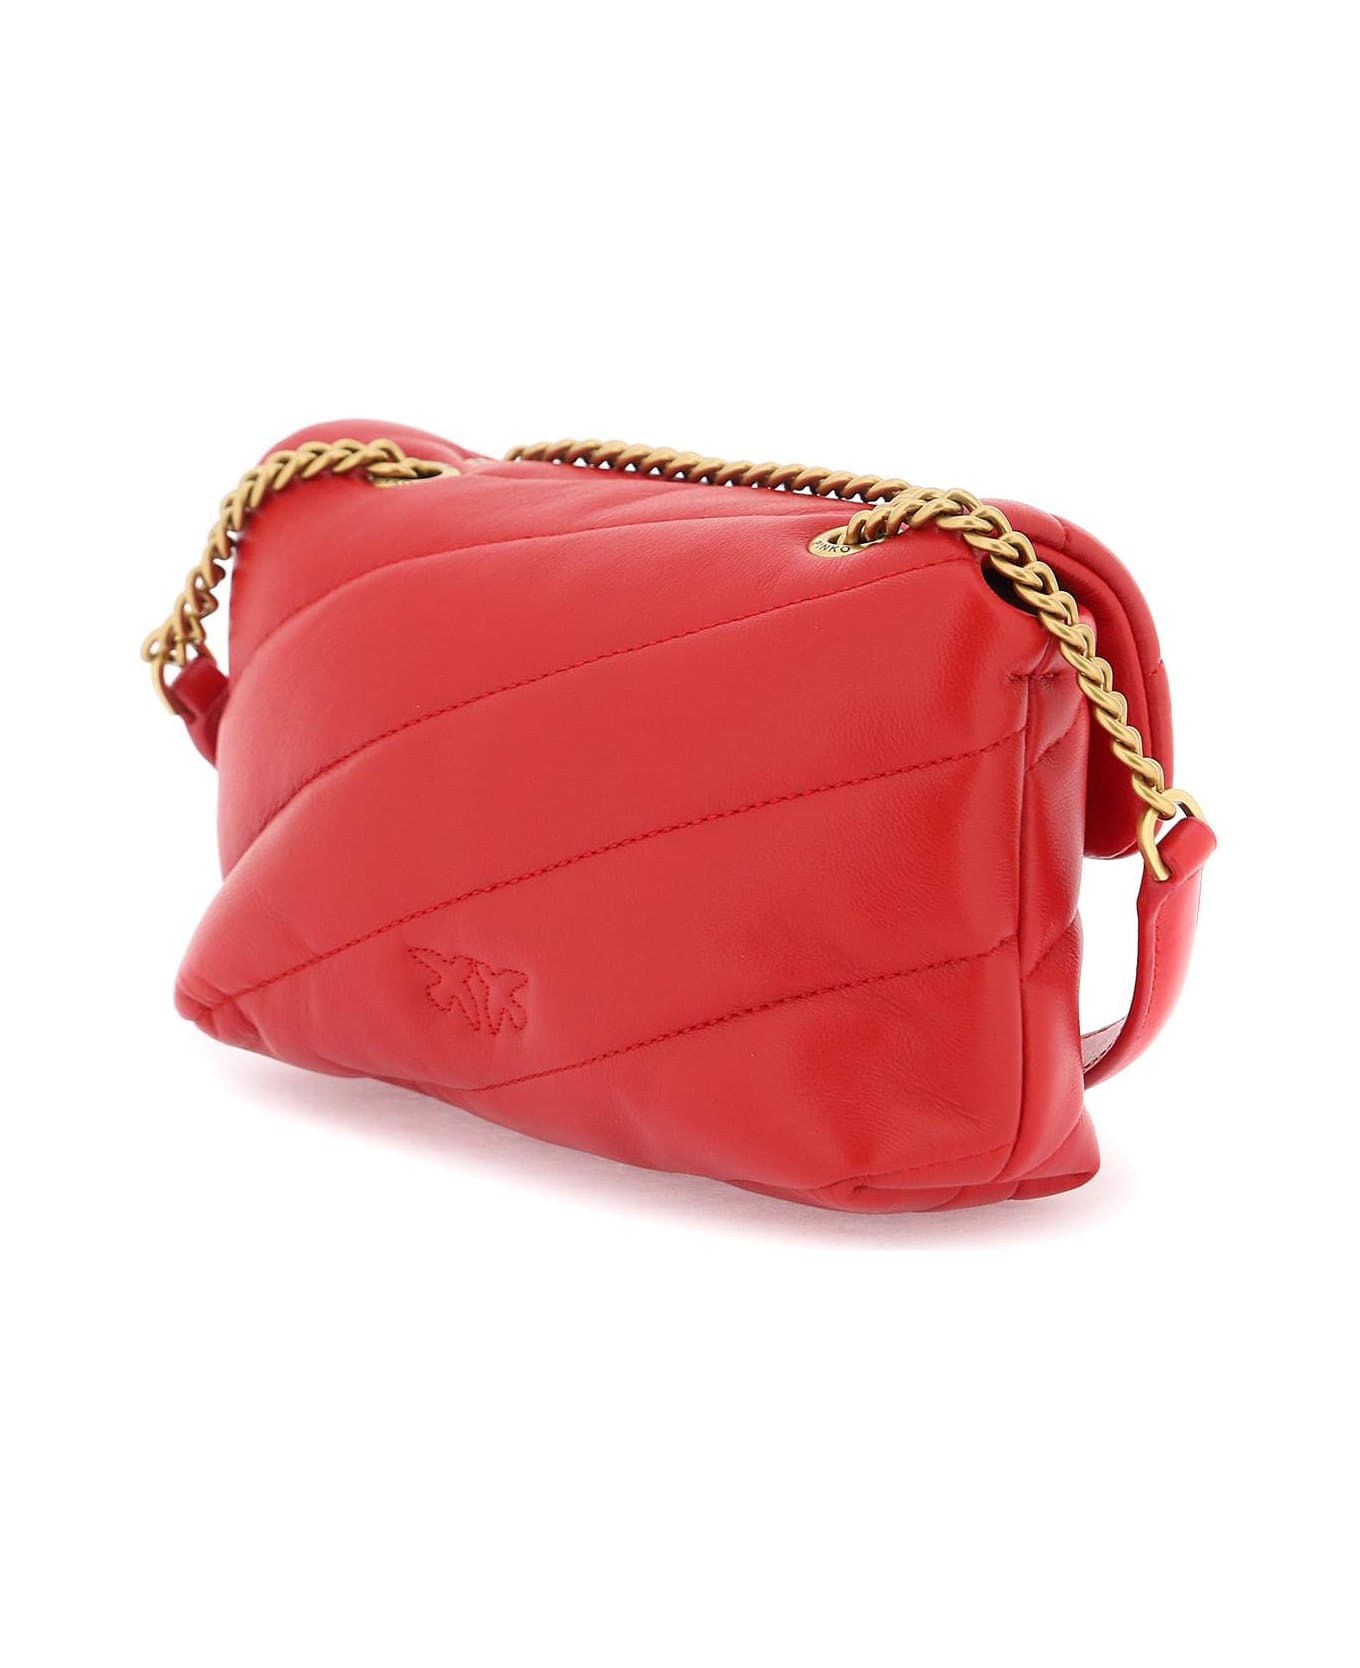 Pinko Love Baby Puff Quilt Bag - ROSSO ANTIQUE GOLD (Red) ショルダーバッグ